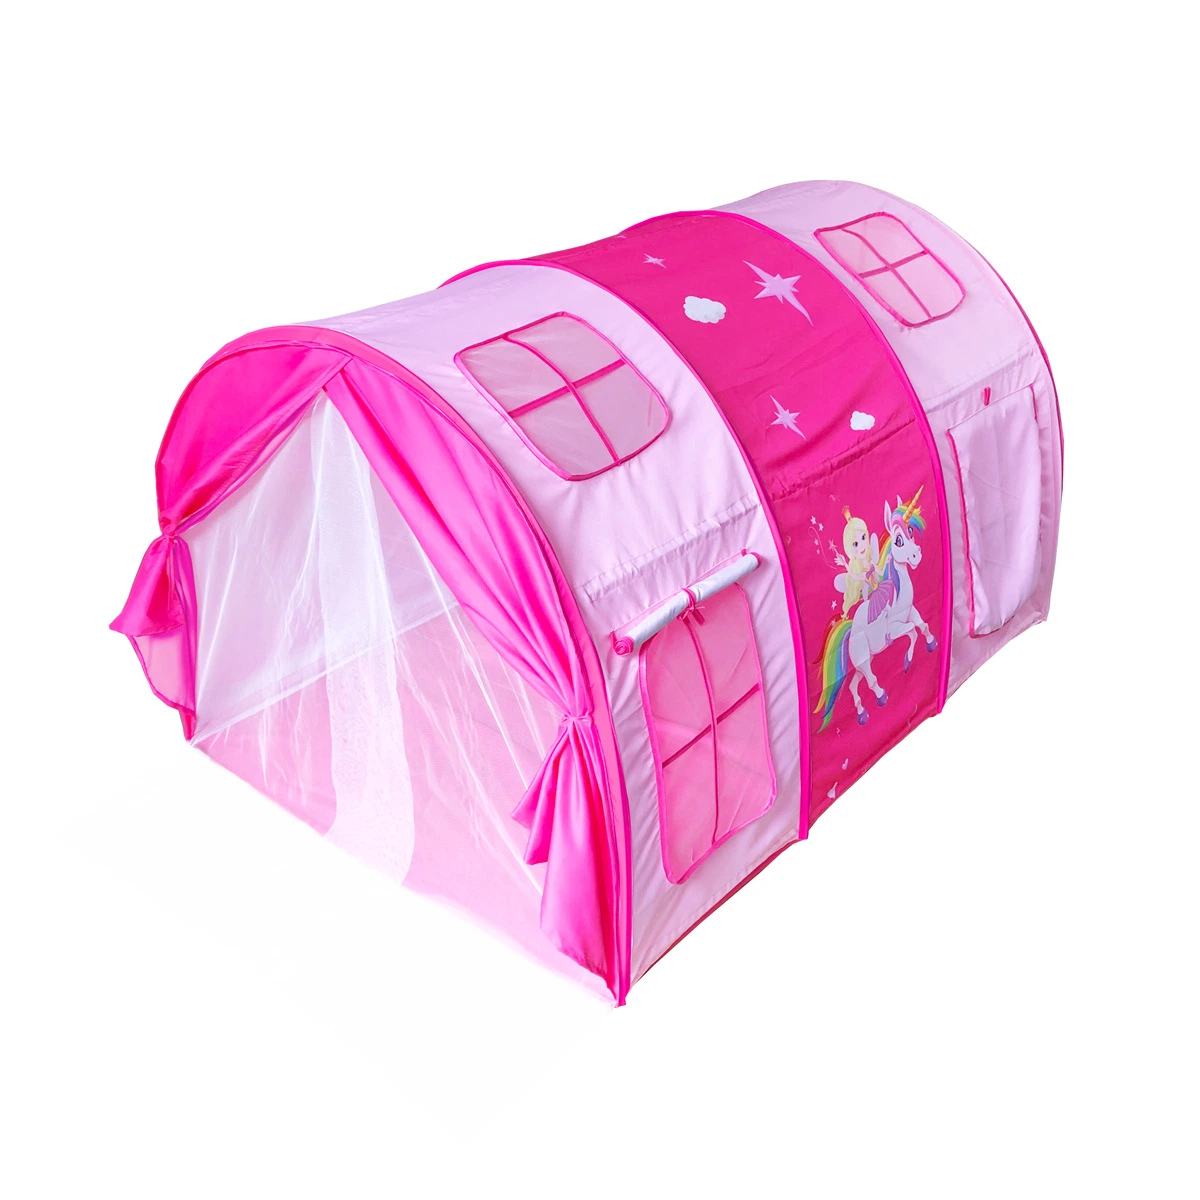 Children Bed Tent Separate Bed Play House Indoor Castle Magic Toy Outdoor Unicorn